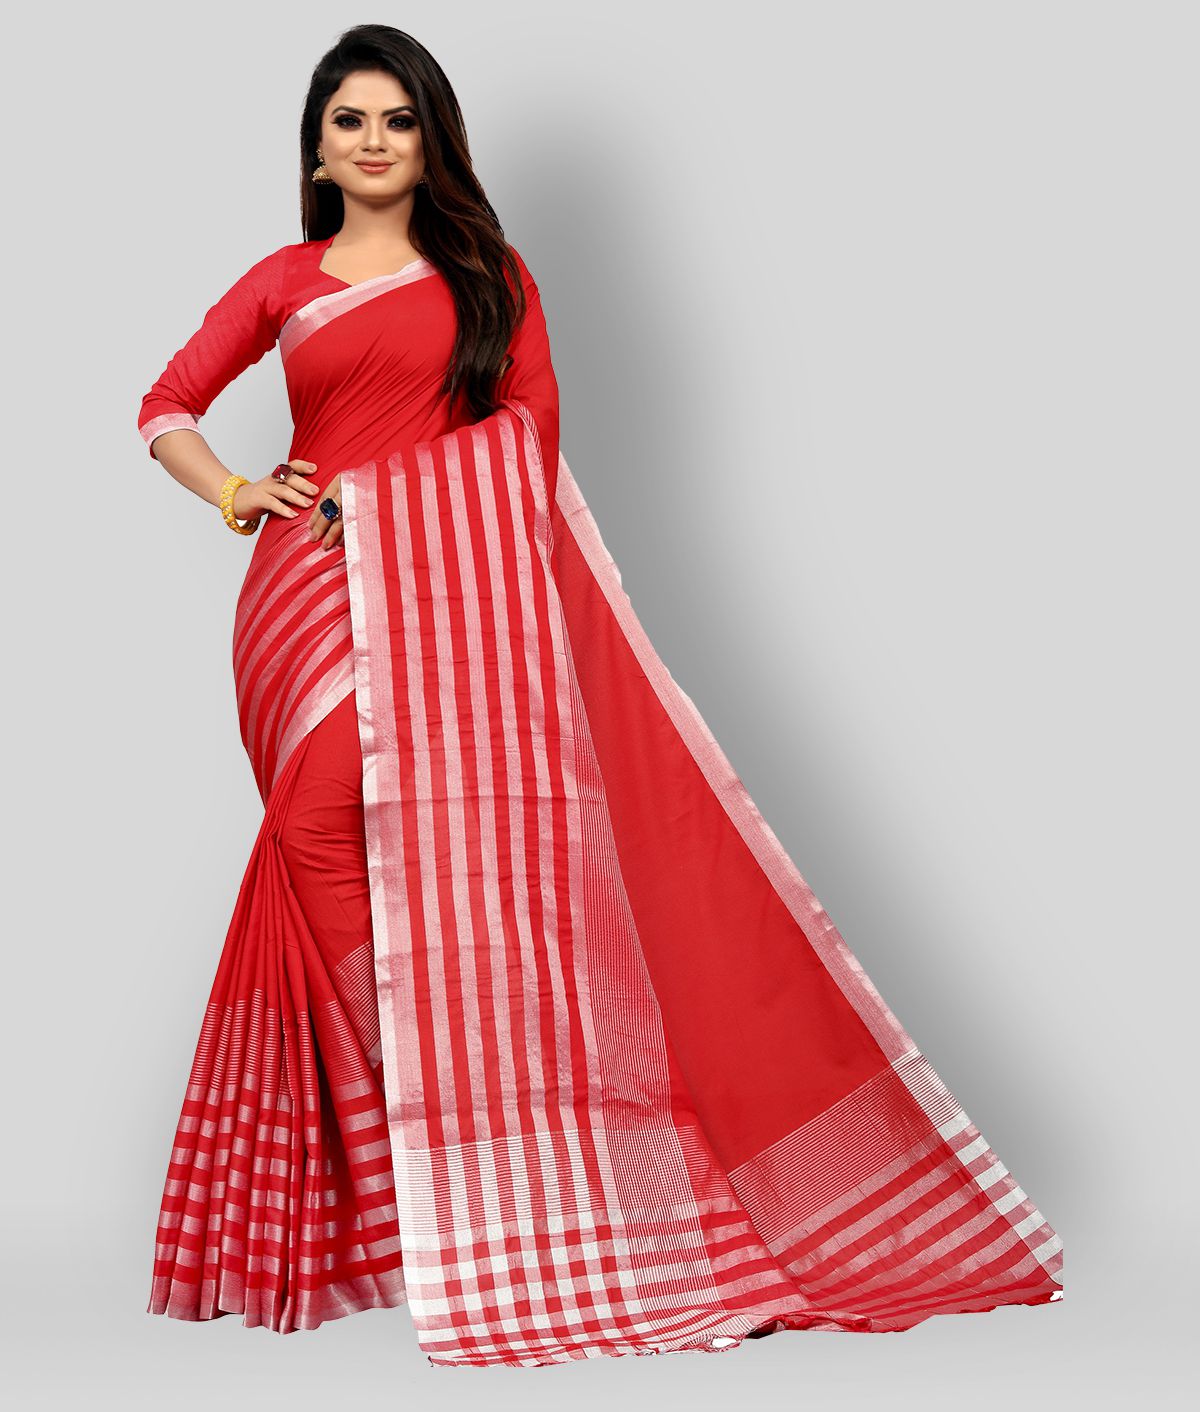 Gazal Fashions - Red Cotton Saree With Blouse Piece (Pack of 1)